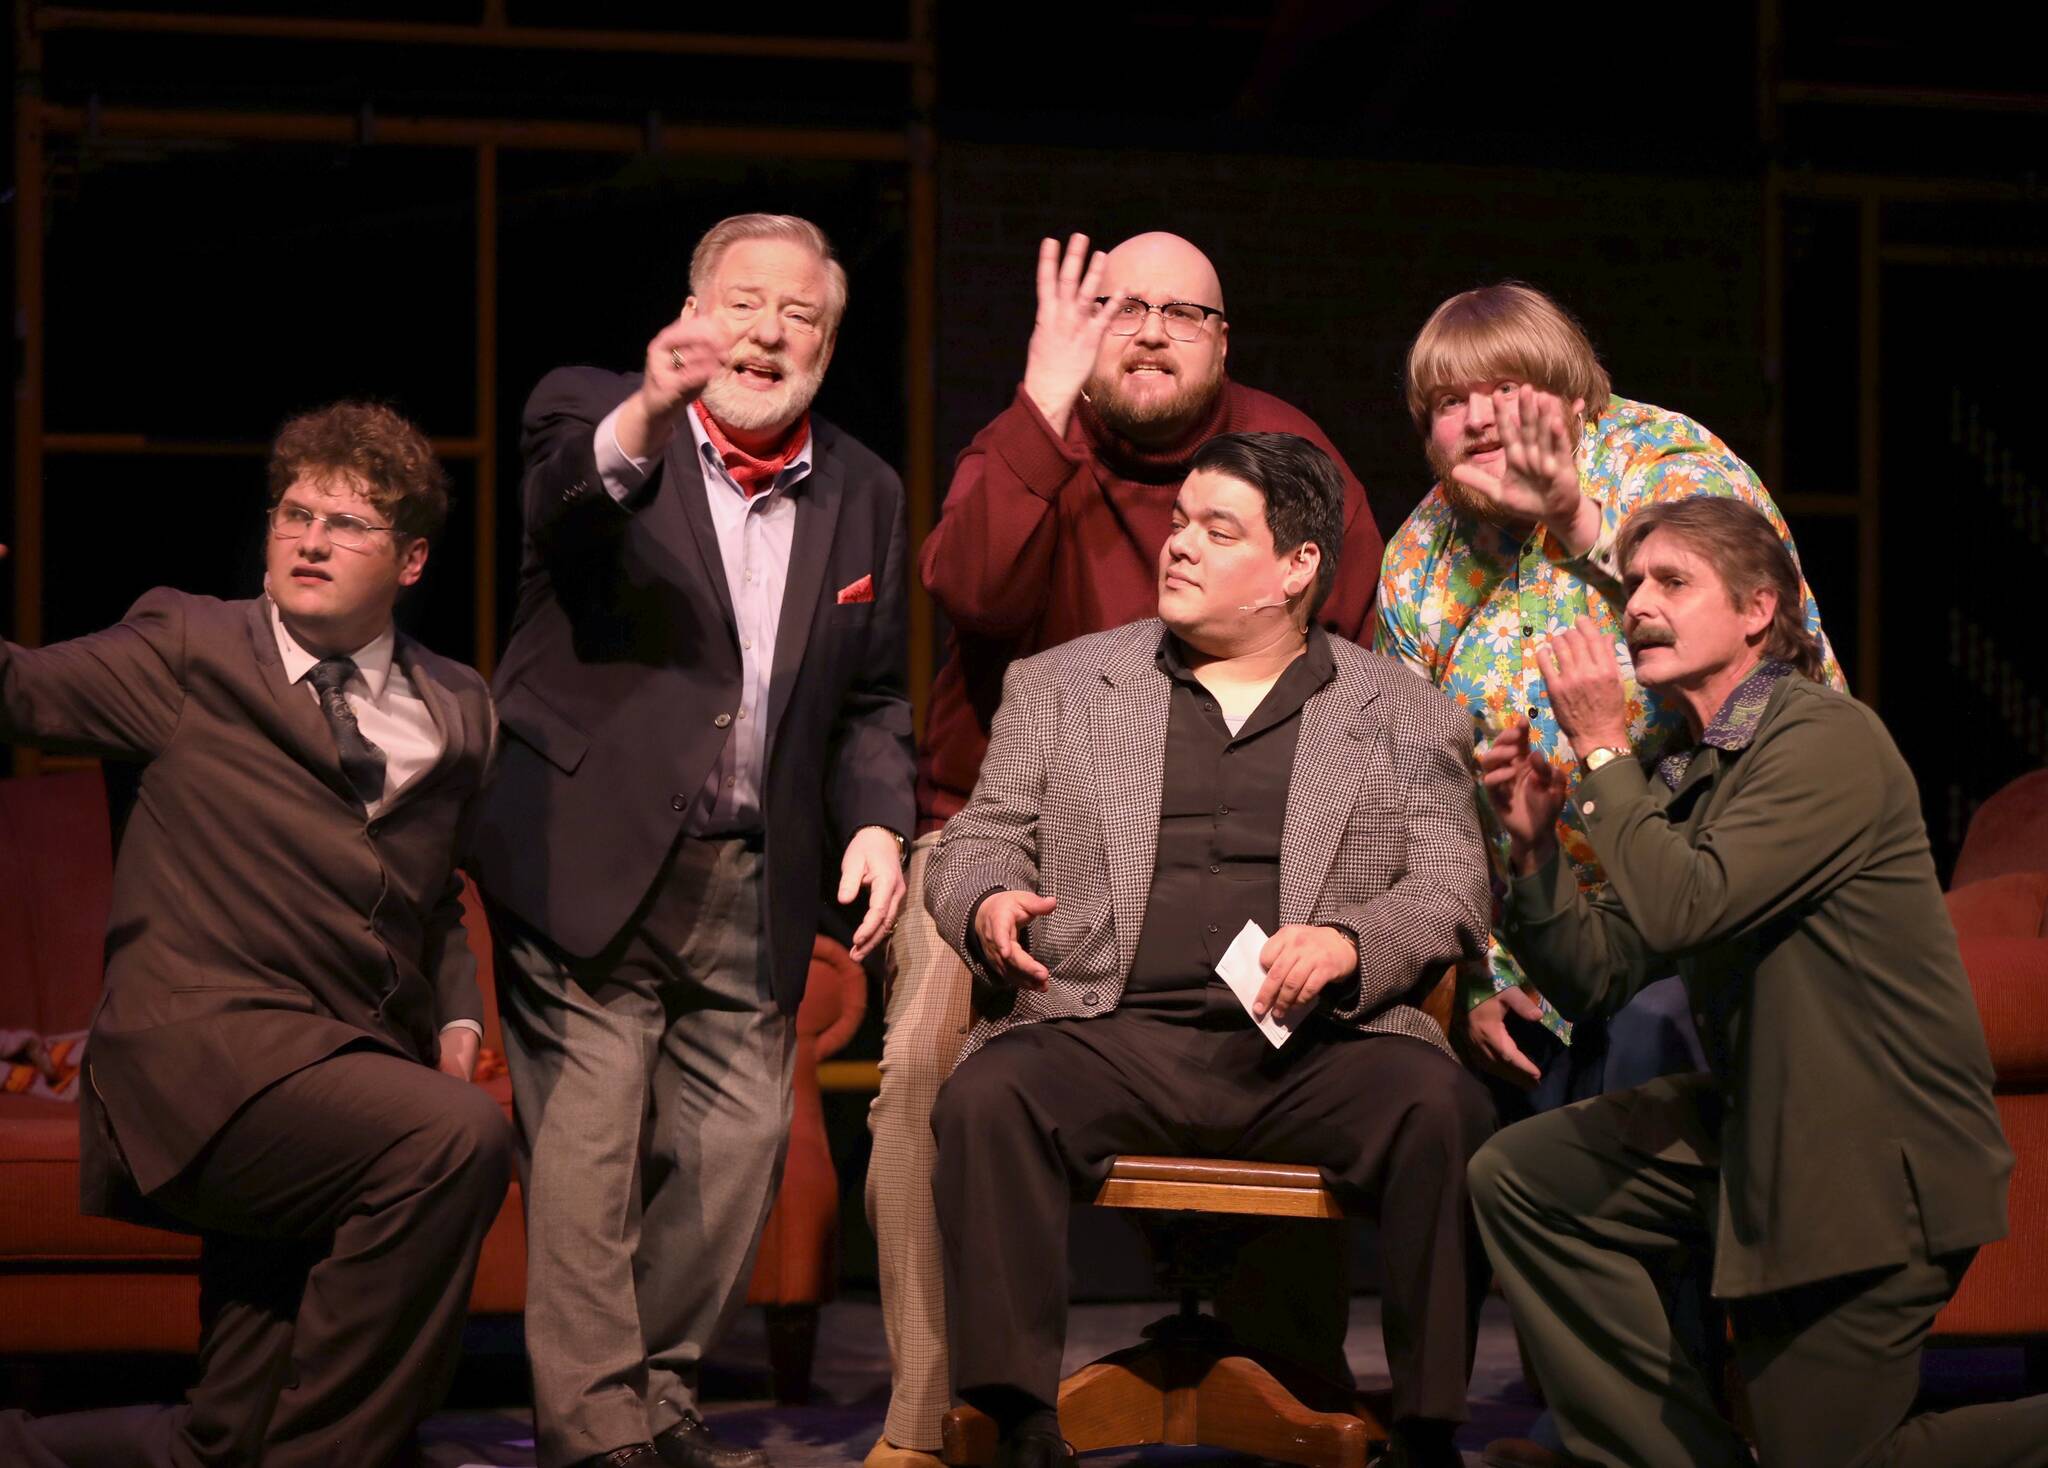 Robert (played by Chris Fruto, in chair) receives unsolicited advice on romance from some of his male friends (played by, from left: Noah Johnson, Stan Sidor, Matthew Kline, Elliot Loudenback and Eric Bjella).